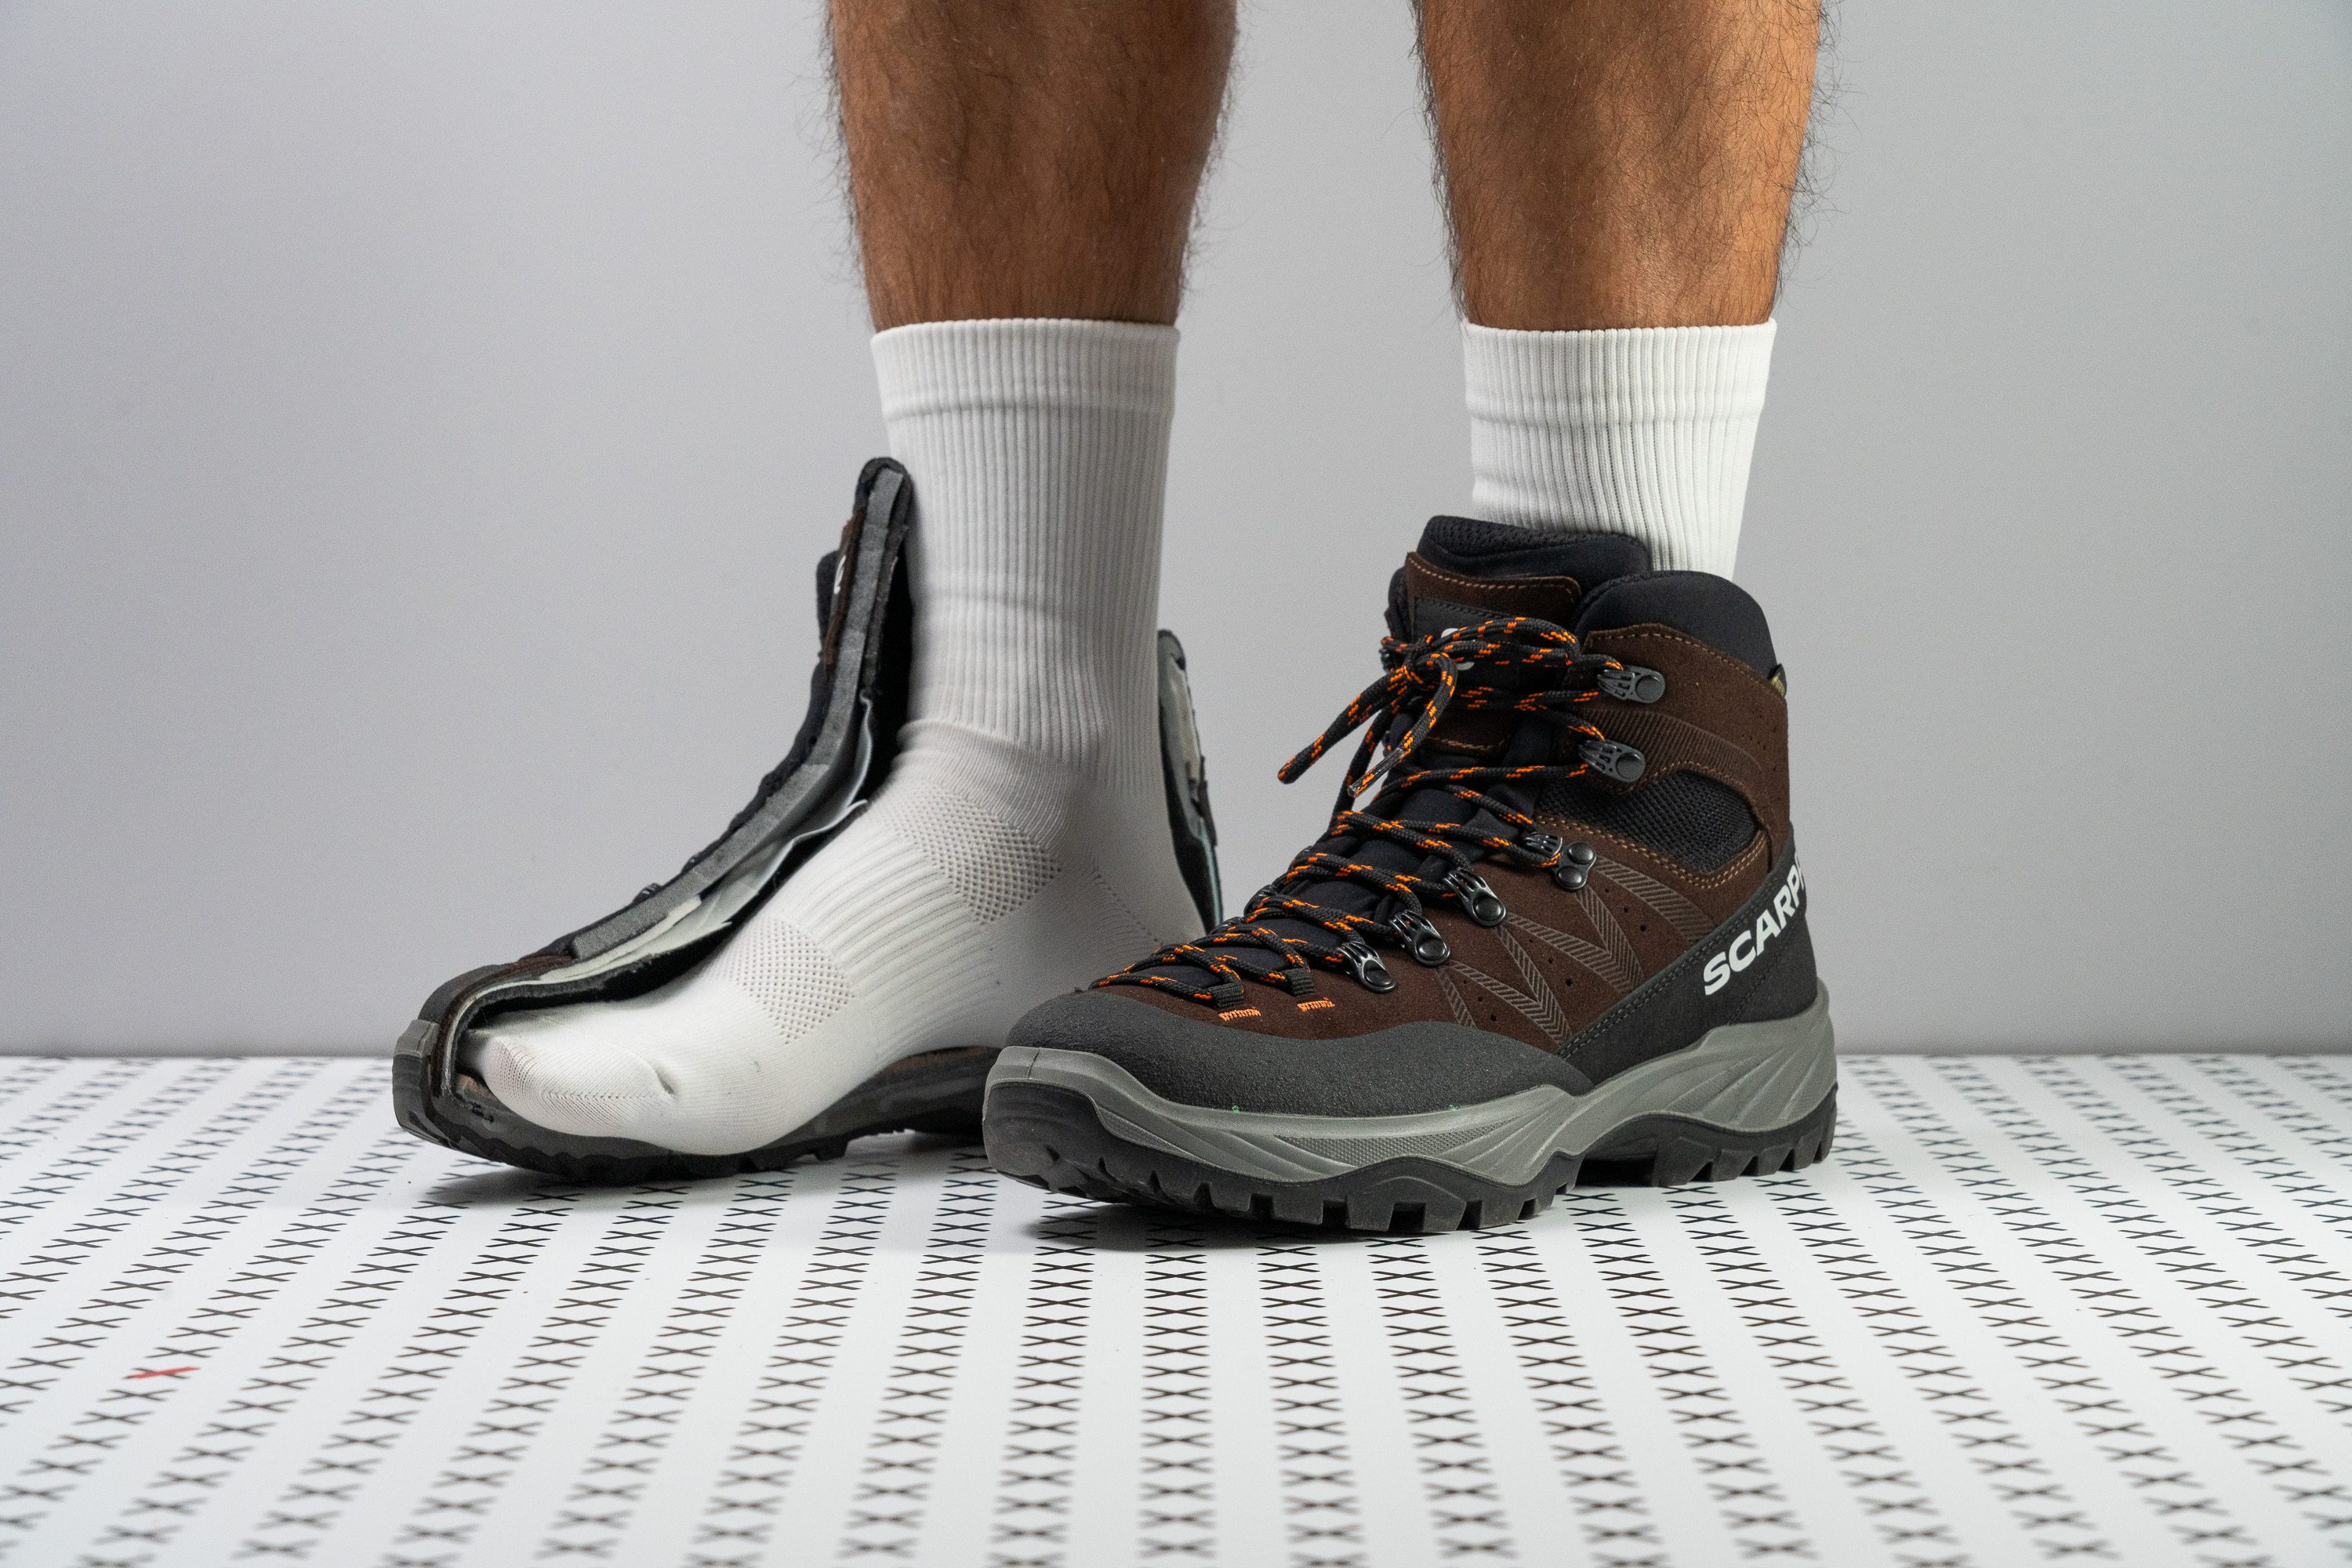 We recommend the Boreas GTX as an excellent choice for primary